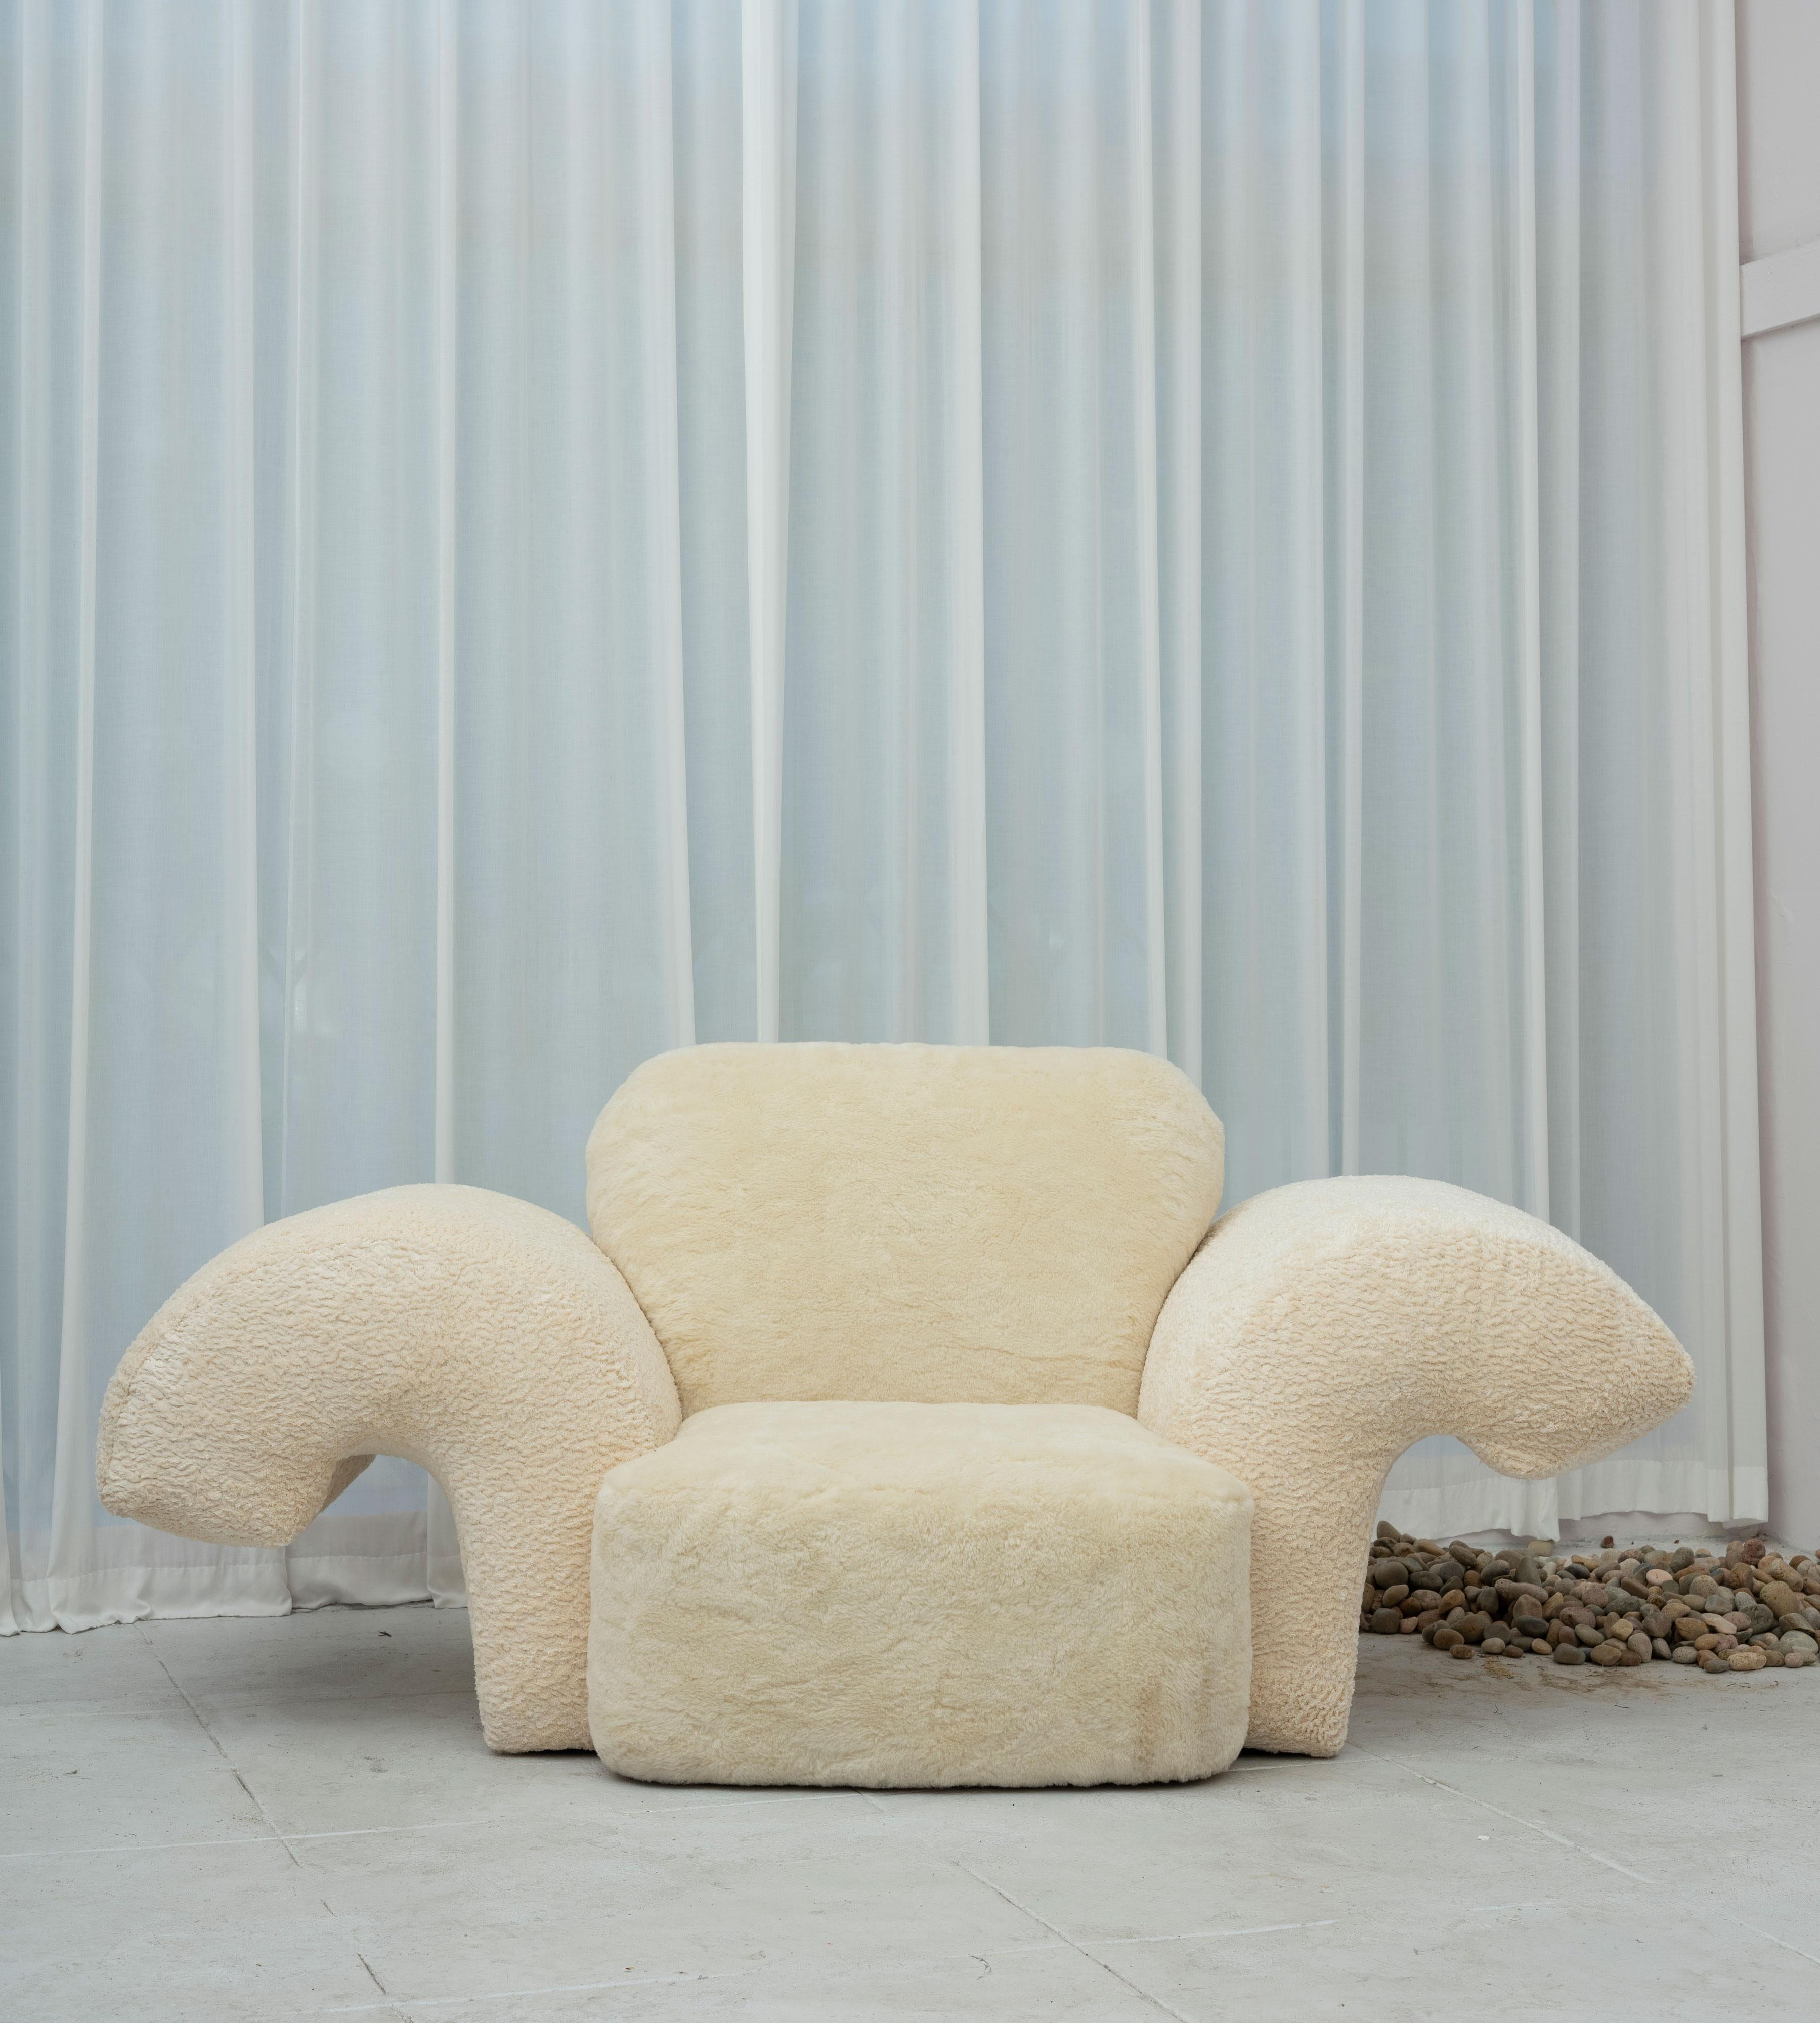 The Piazza chair invites a crowd to hang in and around it’s large footprint, much like the gathering places in Italian cities. Shown in Feather Boucle on the arms, and Yeti Wool for the seat and back. Made in Los Angeles.
 
SAMPLE: THIS ITEM IS A